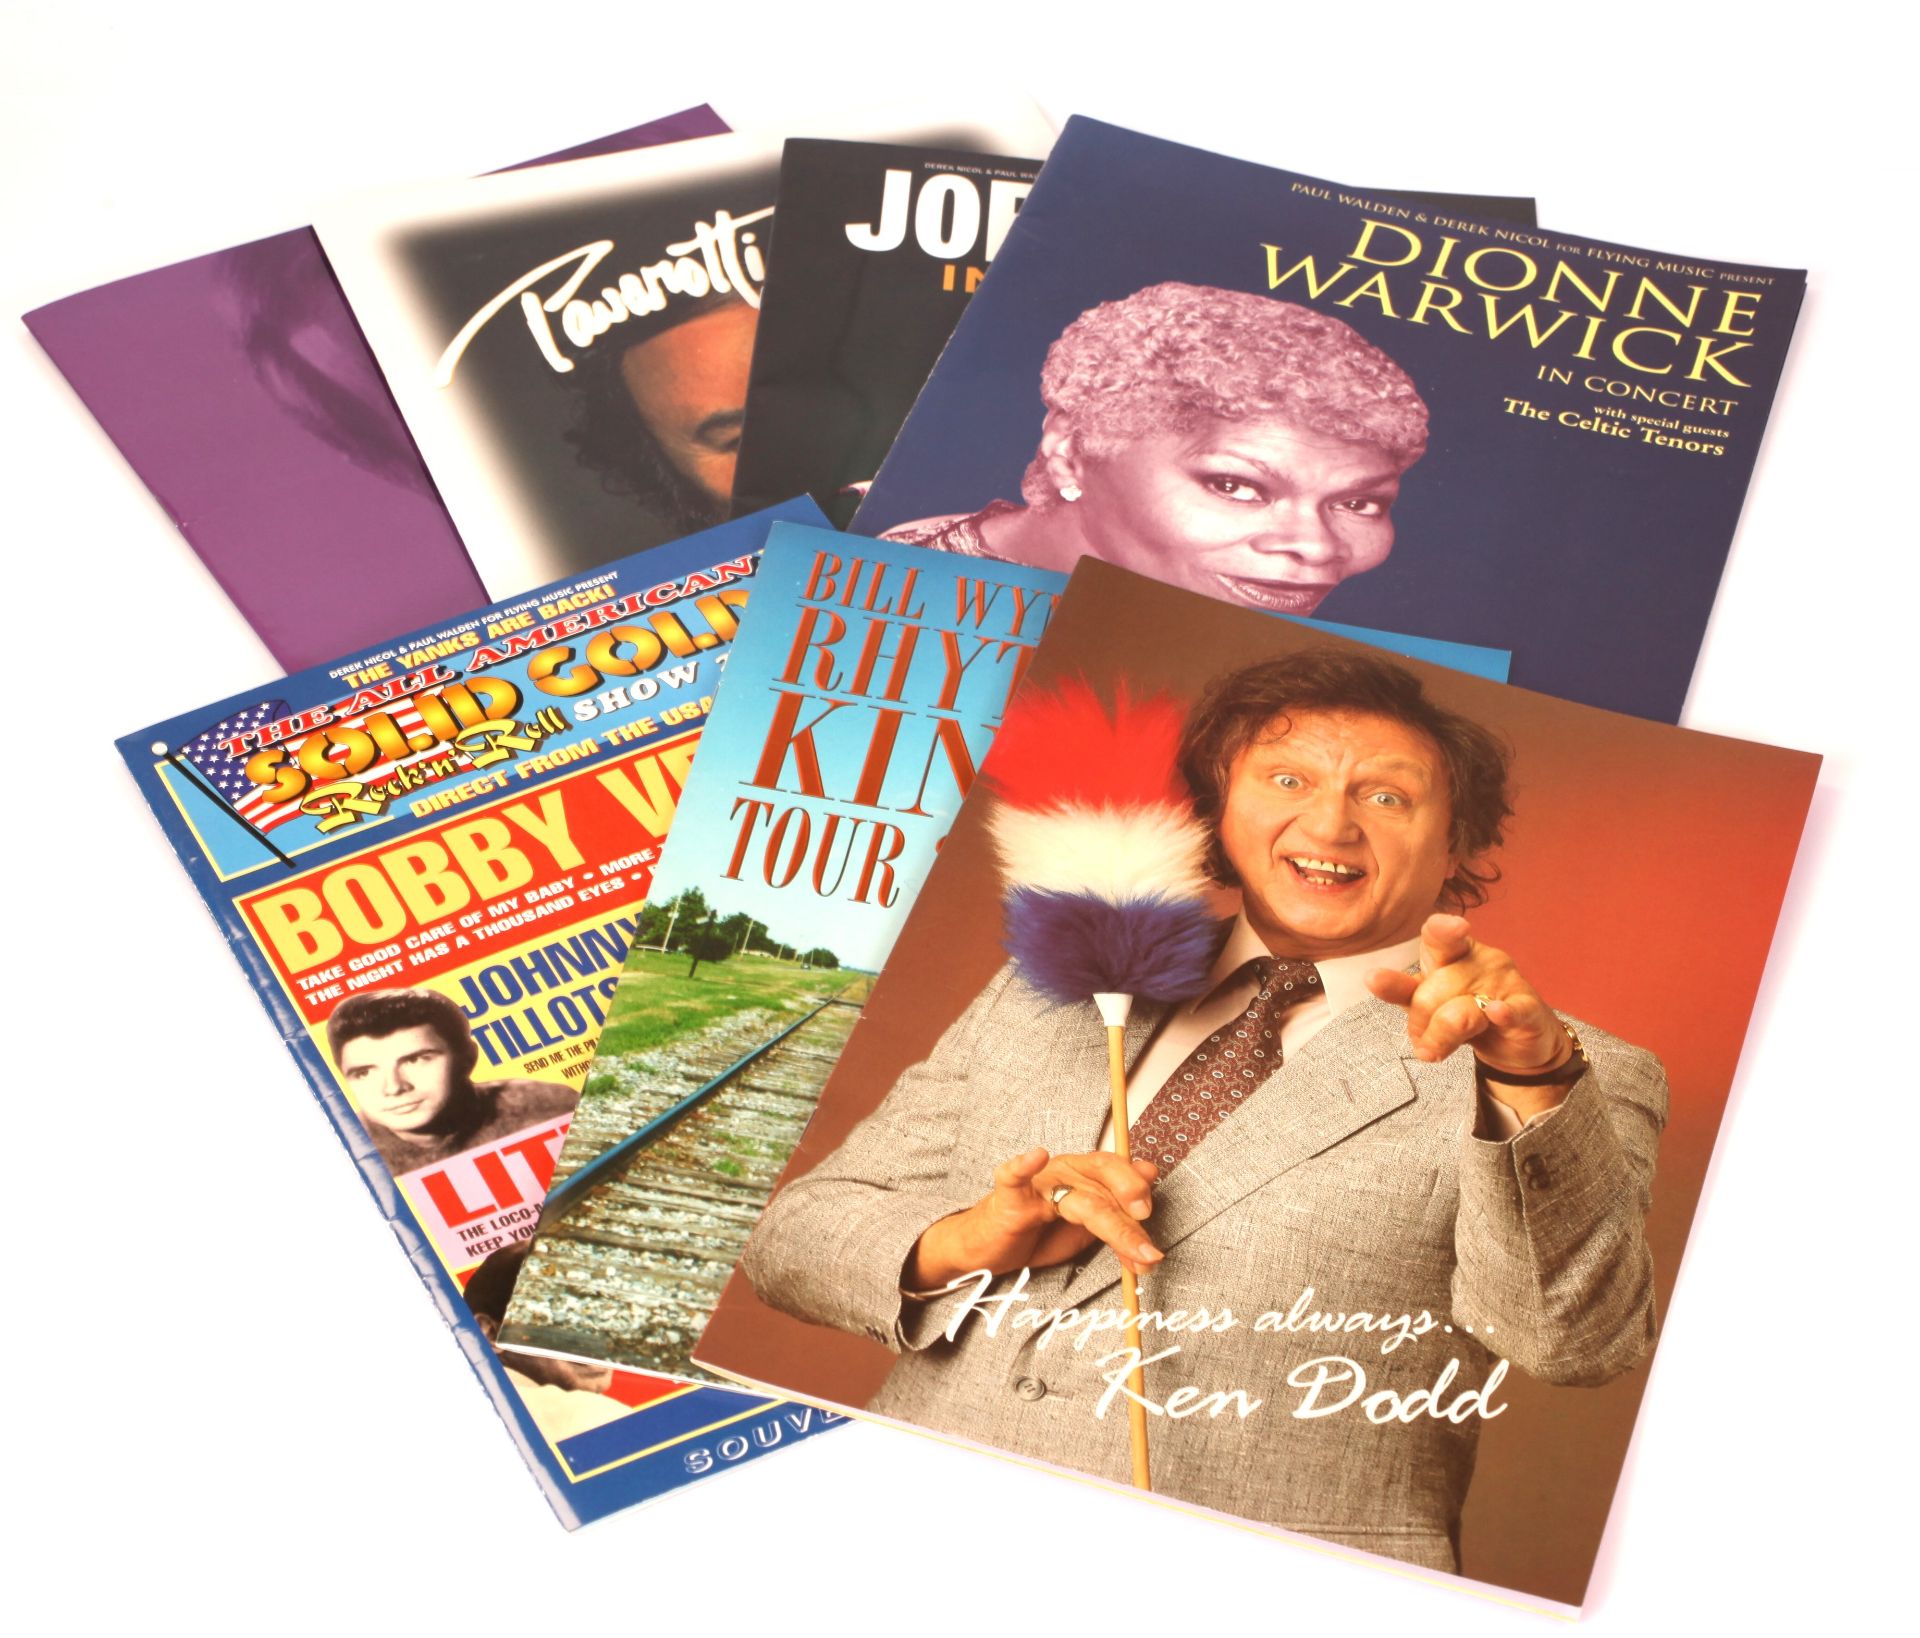 A Collection of Popular Artists Tour Programmes And Related Memorabilia  - Image 4 of 10